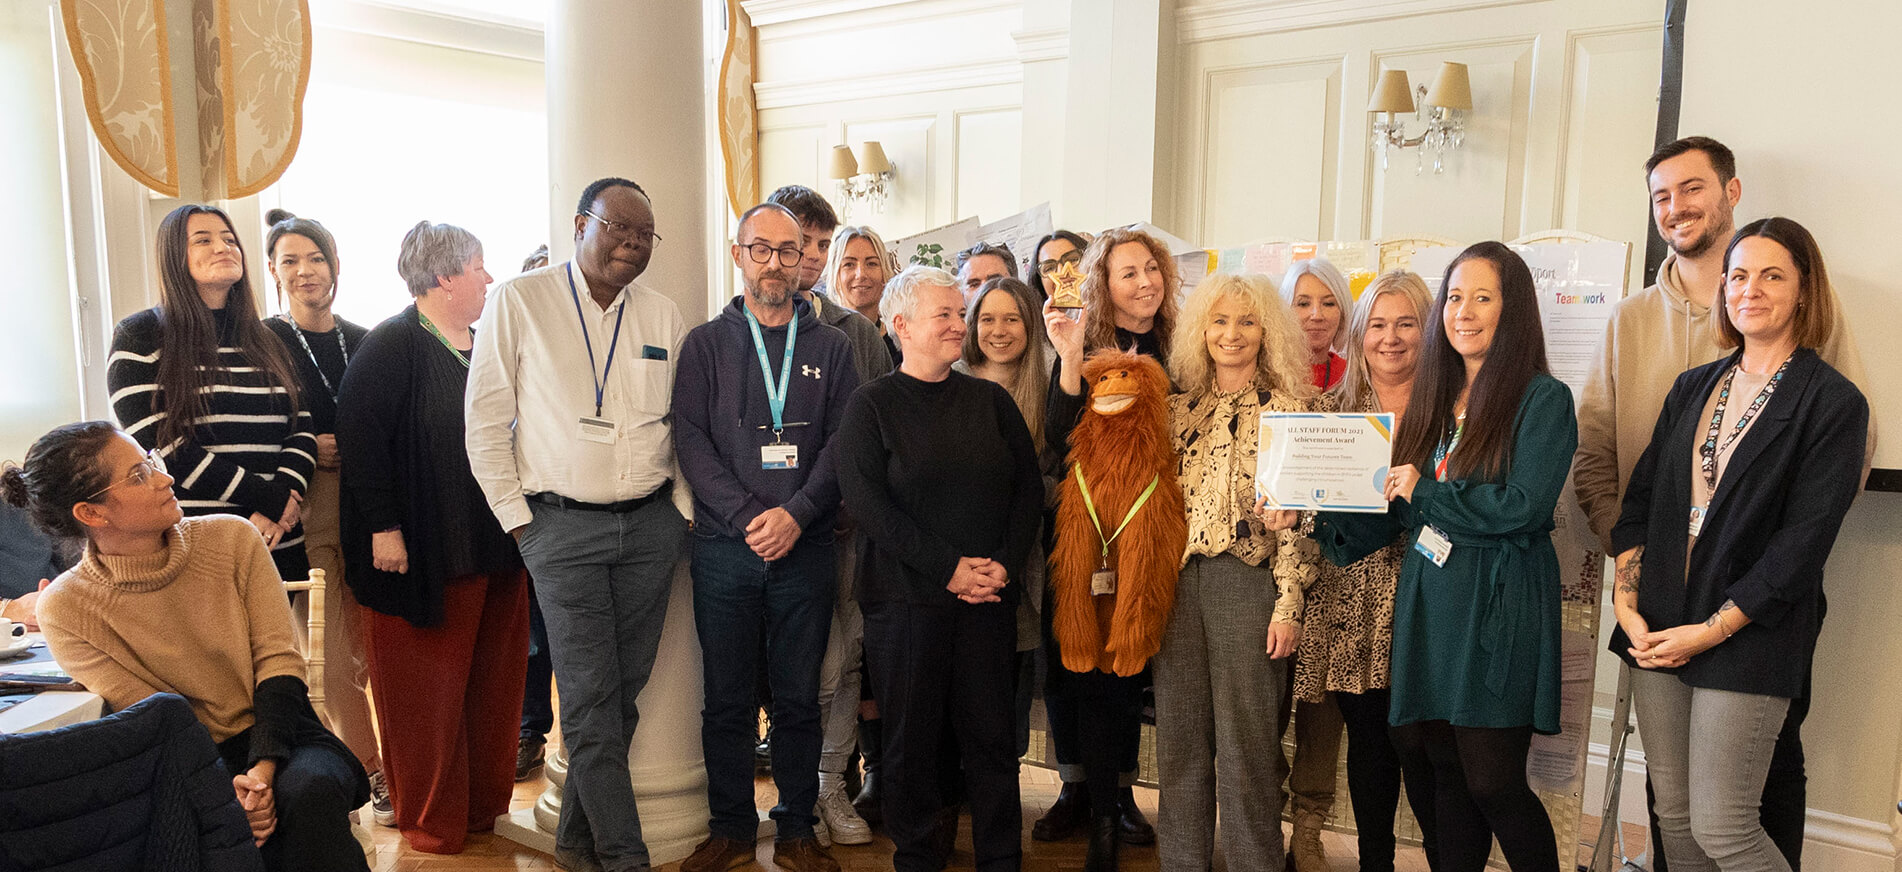 Portsmouth's social care practitioners celebrate their achievements at the event